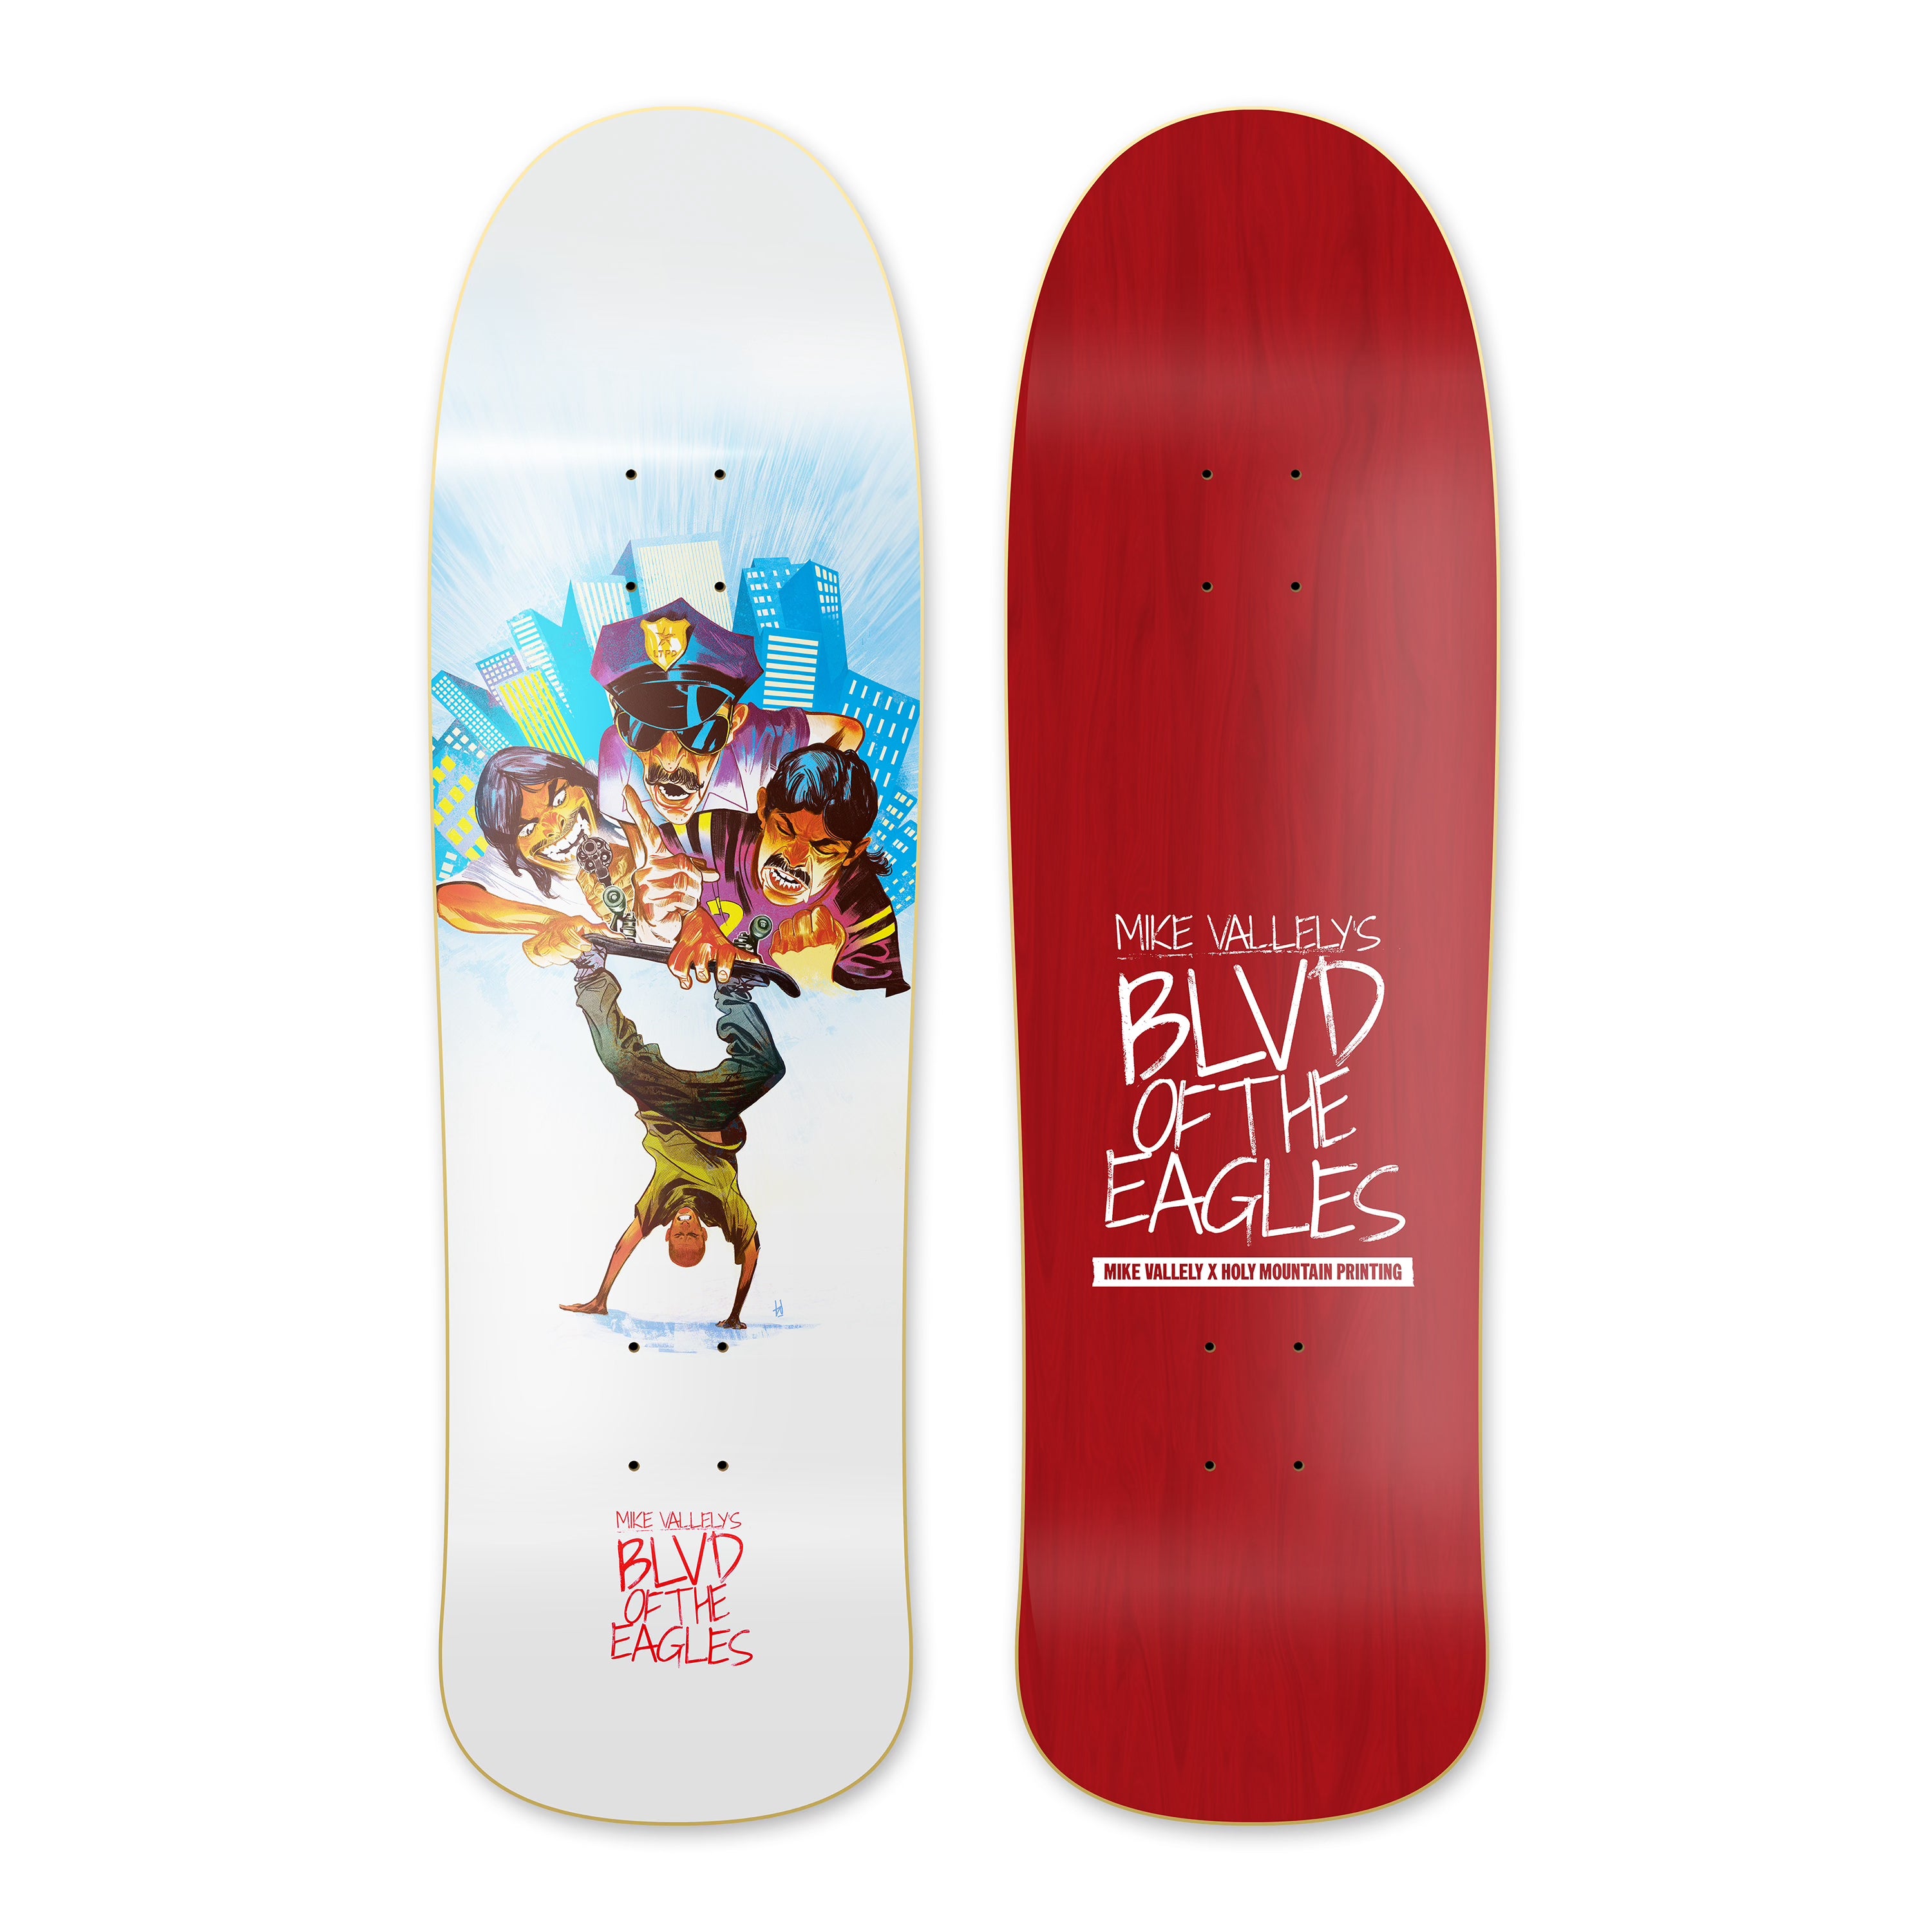 Buy One Board Get Two Free Mike Vallely's BLVD OF THE EAGLES (9.25)